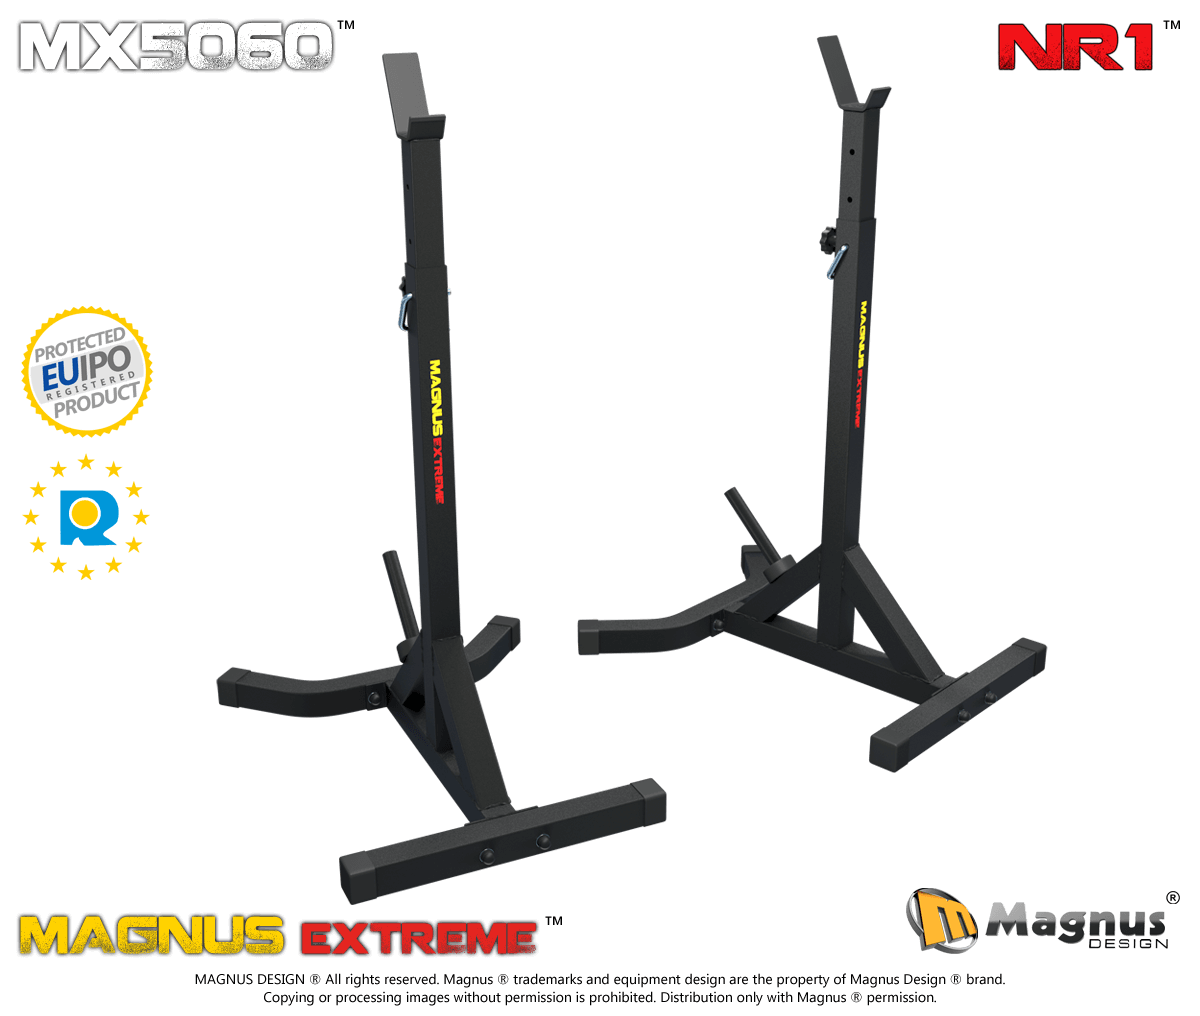 Training stands for barbell Magnus Extreme MX5060